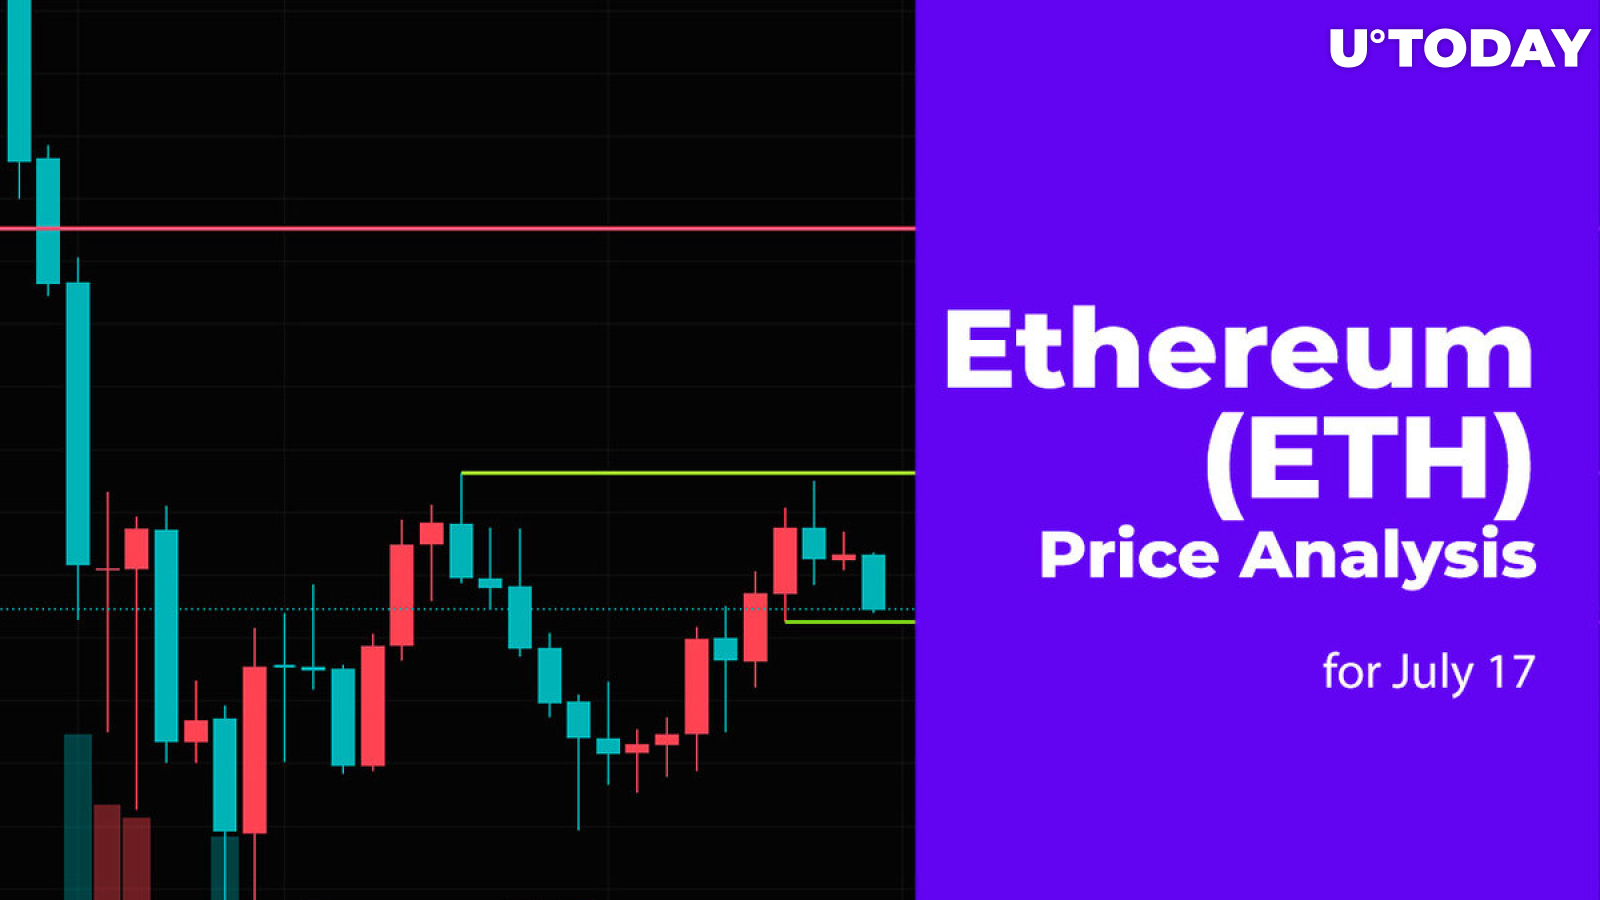 Ethereum (ETH) Price Analysis for July 17